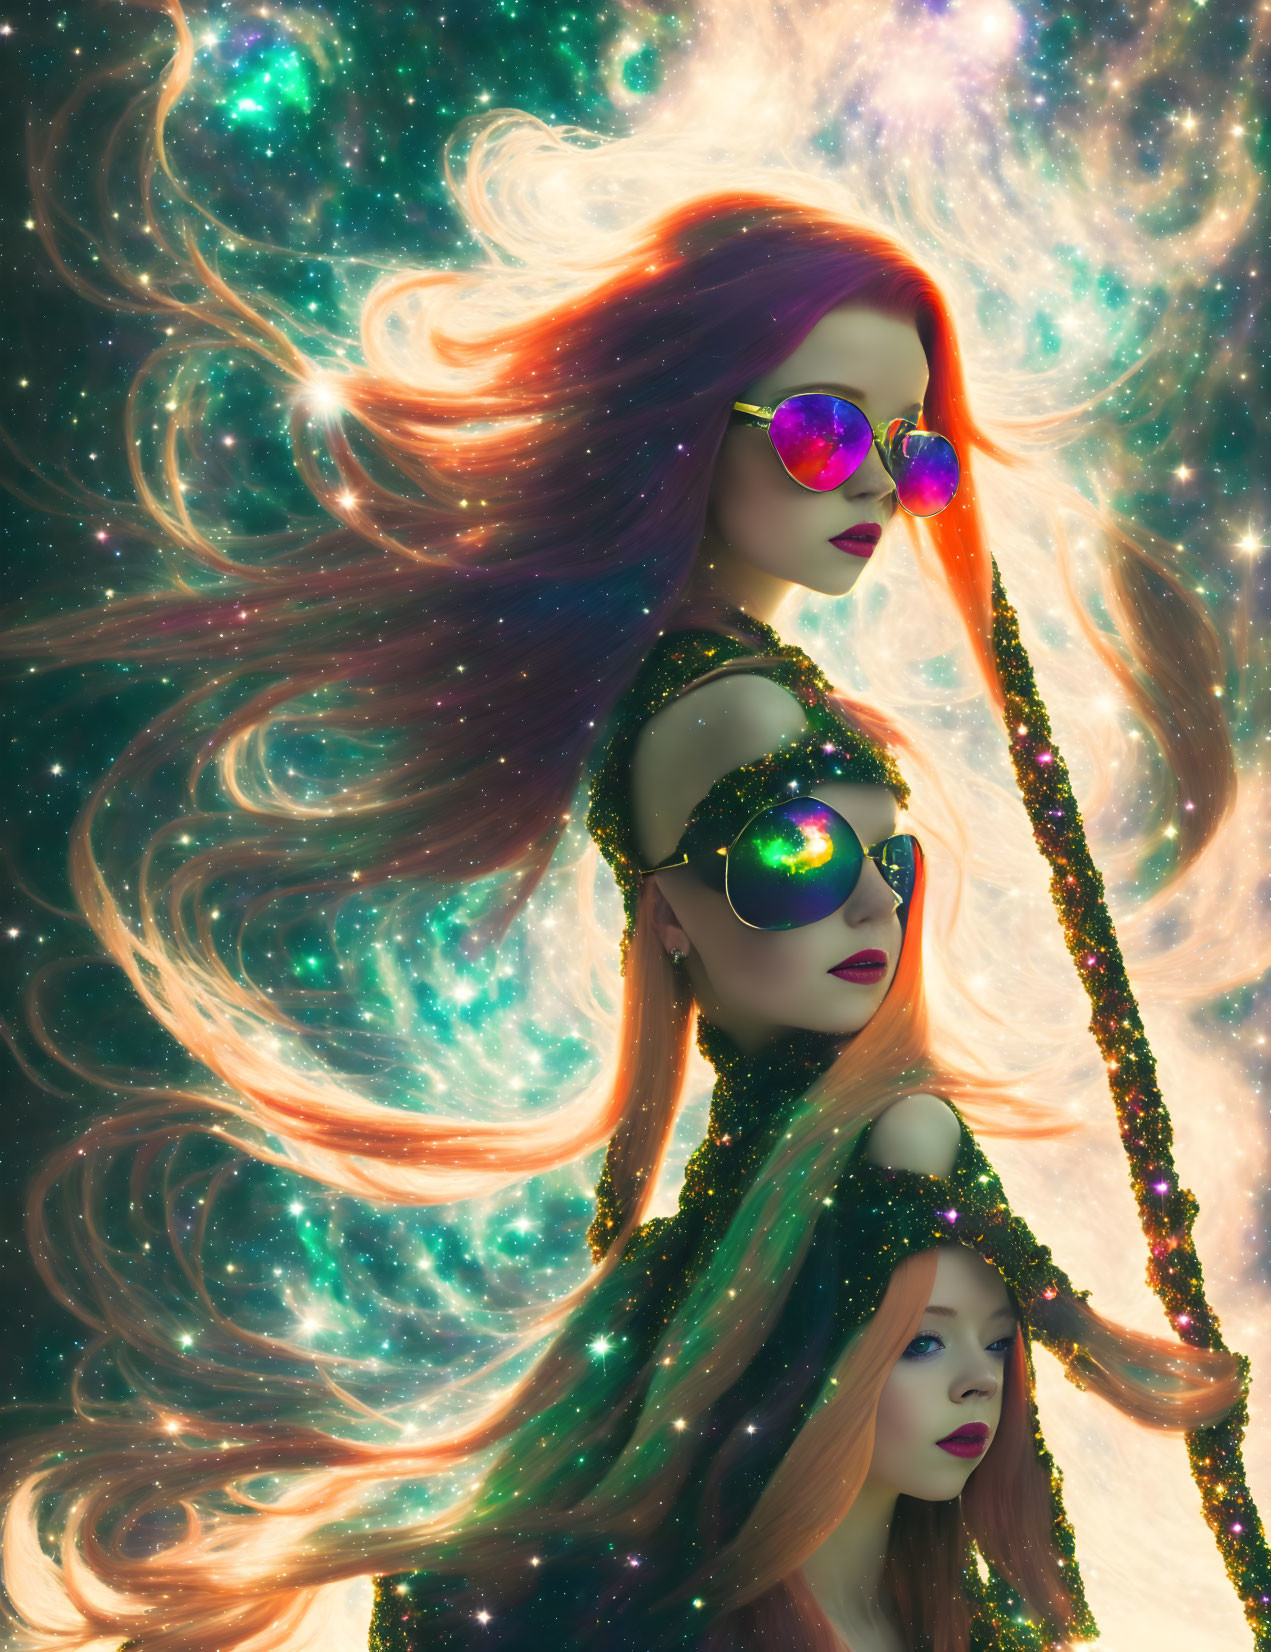 Stylized women with flowing hair and sunglasses in cosmic setting